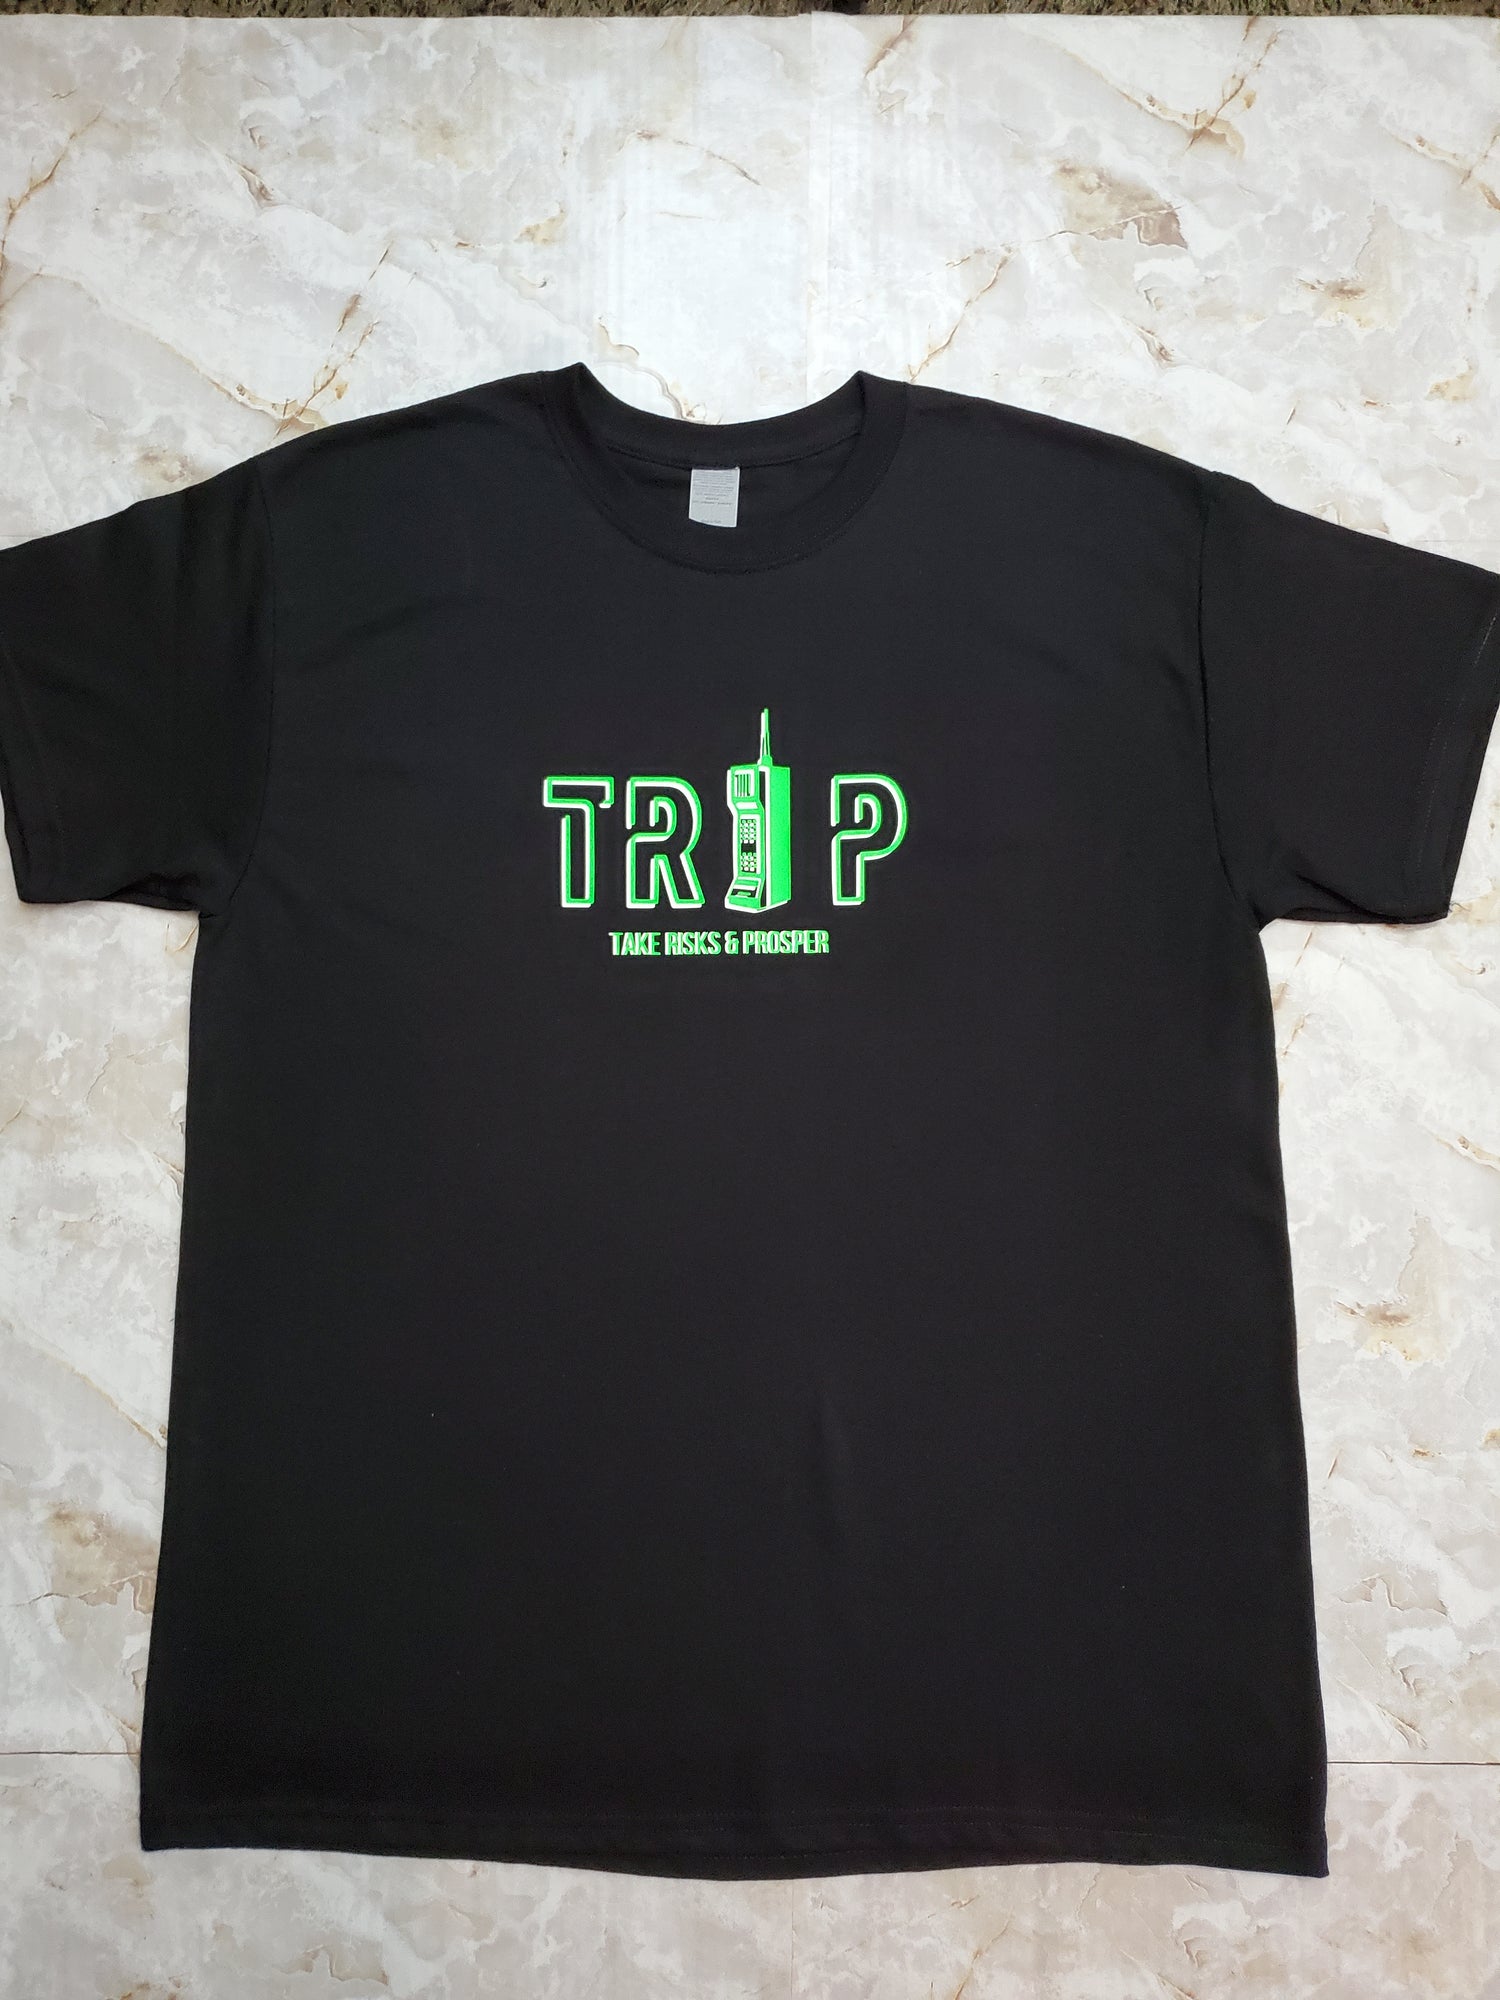 T.R.A.P T-Shirt (Electric Green) - Centre Ave Clothing Co.